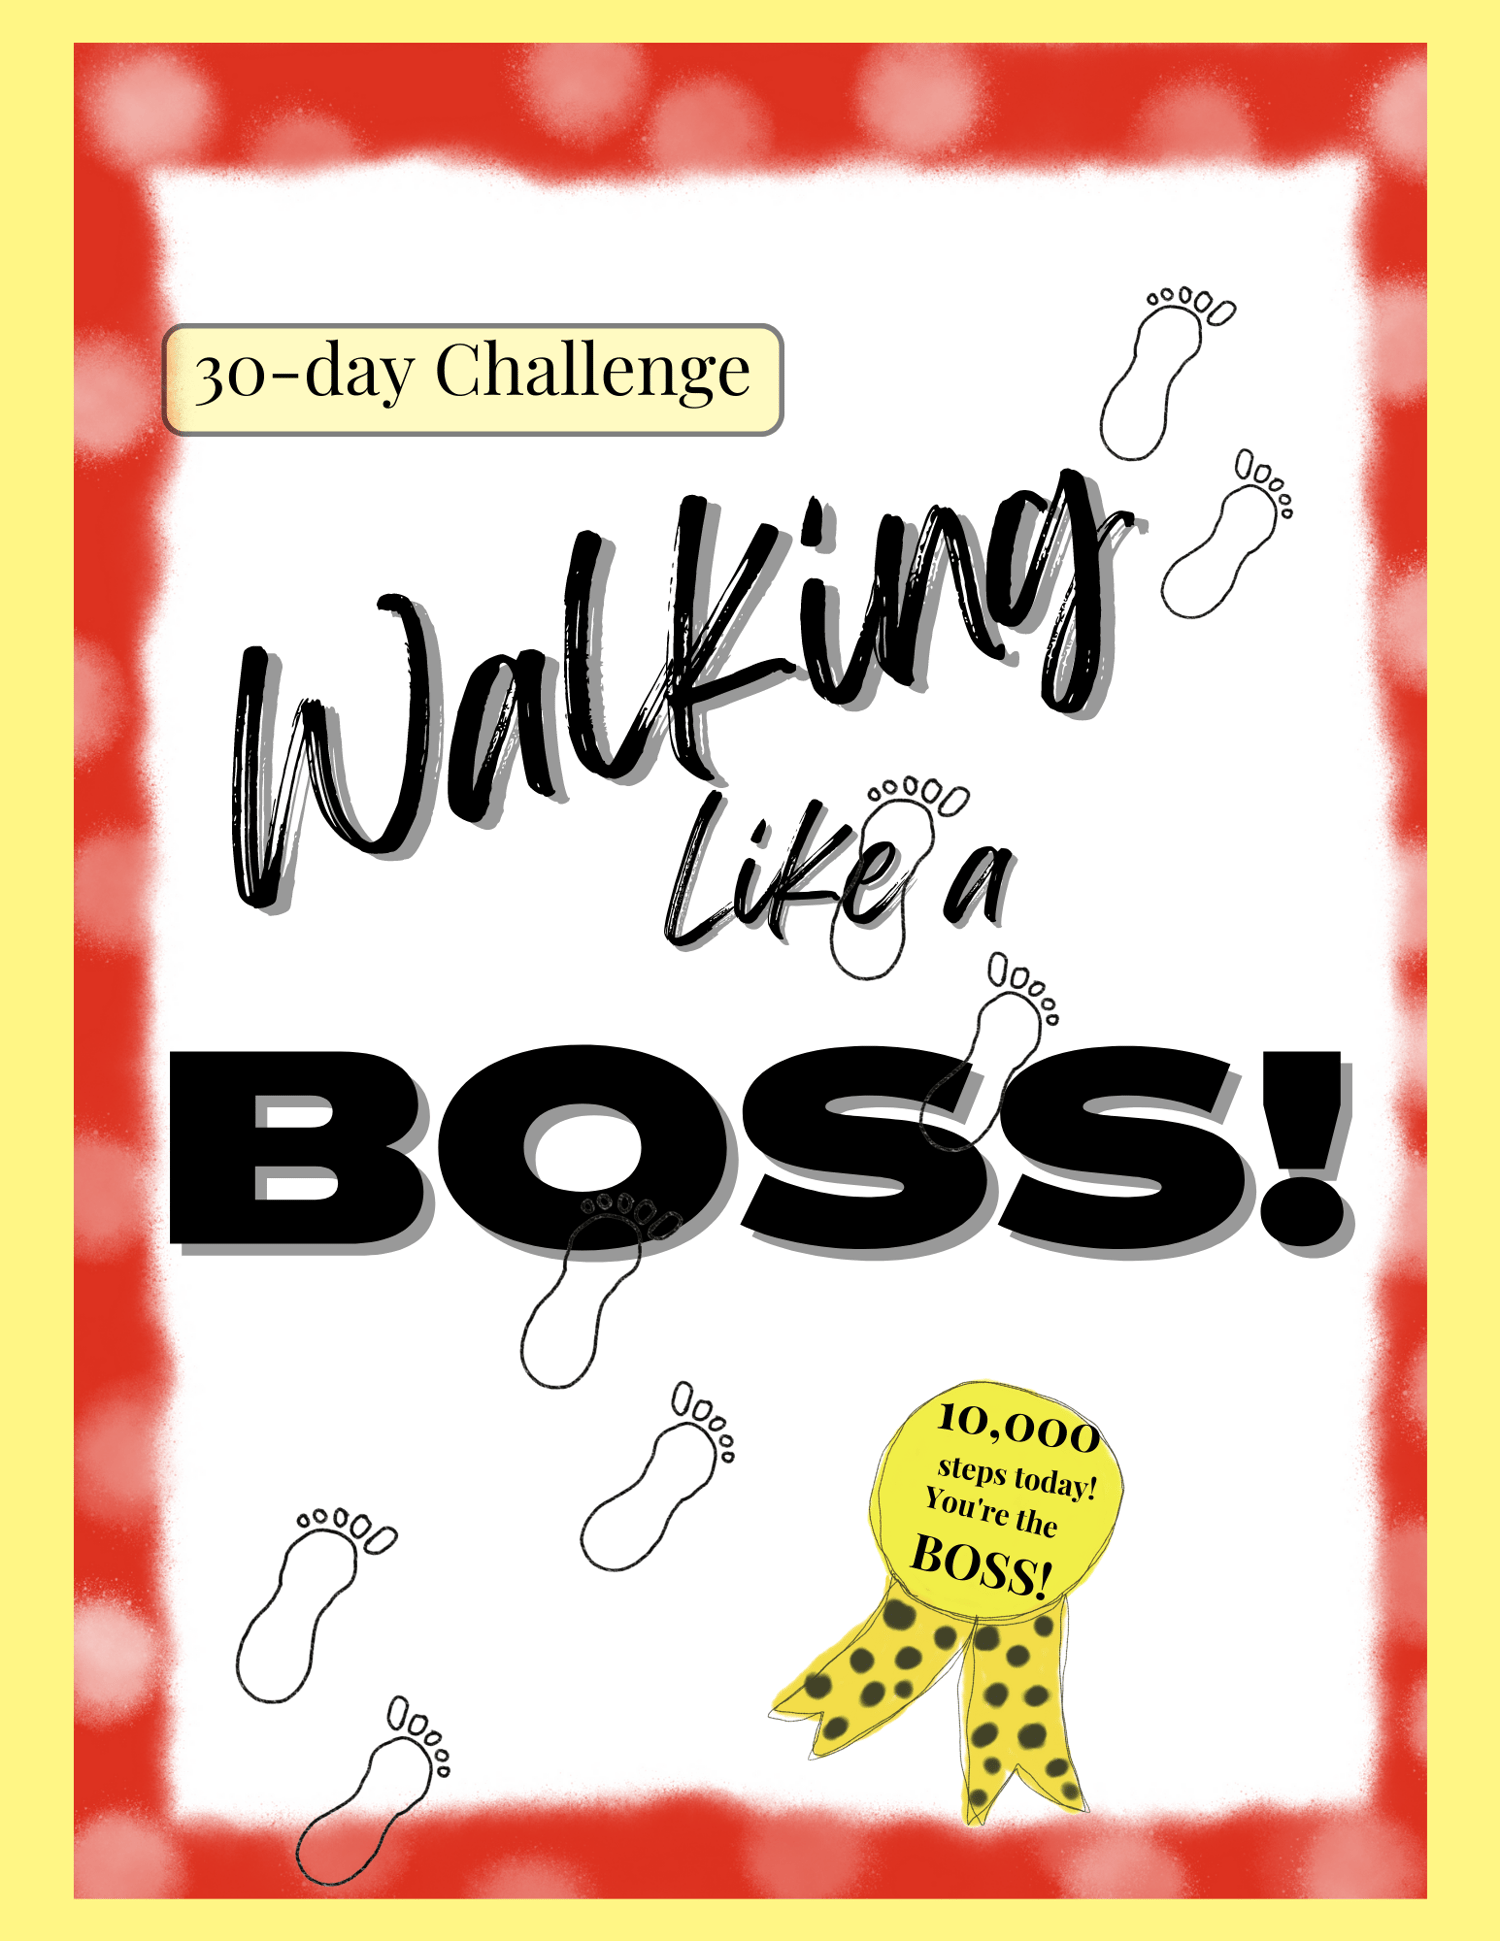 This is the cover page of the Summer 30 Day "Walking Like a Boss" Challenge journal that you create during the 30 days of identifying reasons and goals, planning, implementing your plans, reflecting on your progress, using affirmations and motivational qu